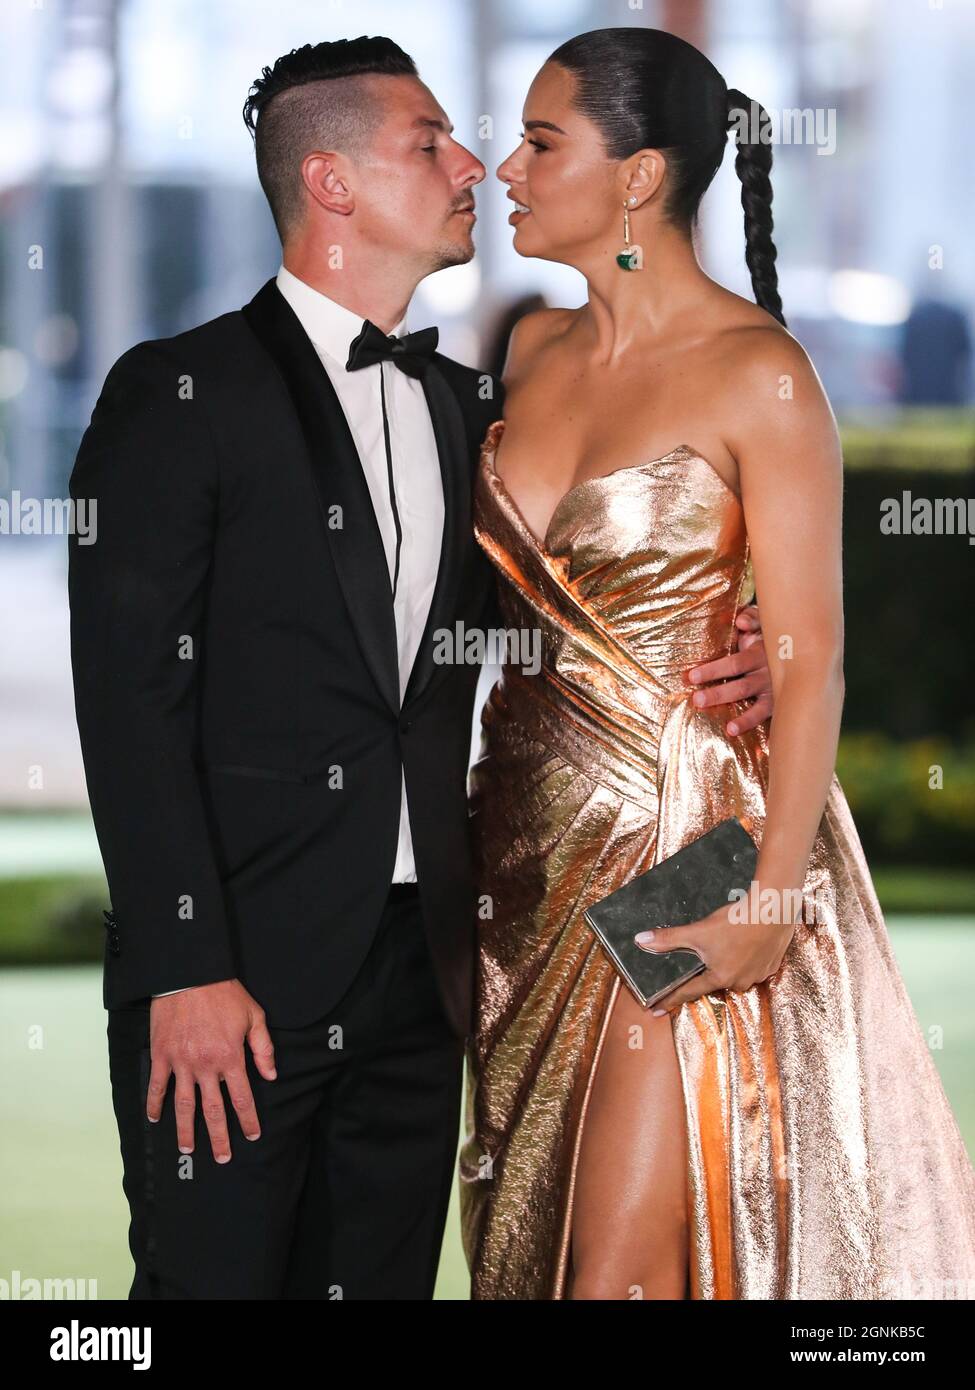 LOS ANGELES, CALIFORNIA, USA - SEPTEMBER 25: Andre L III and  girlfriend/model Adriana Lima wearing a Nicolas Jebran dress arrive at the  Academy Museum of Motion Pictures Opening Gala held at the